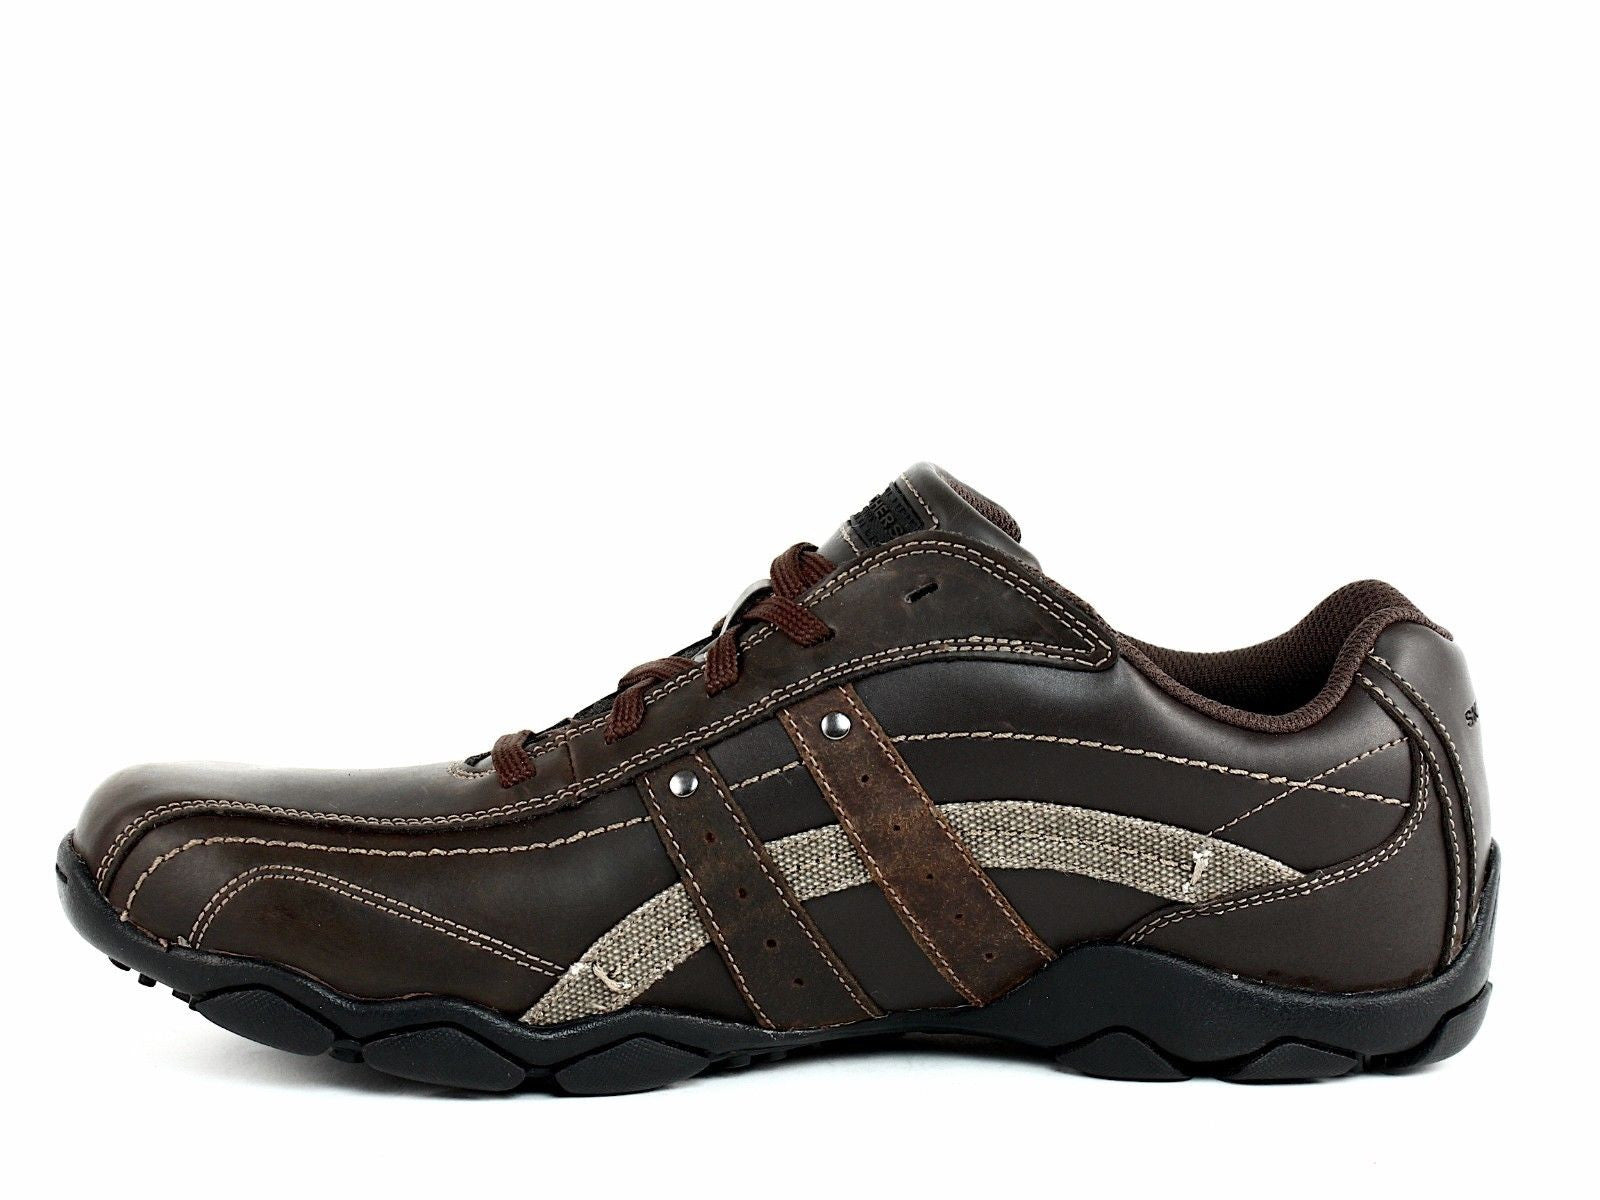 Skechers BLAKE Oxford Men's Work Casual Brown Leather Shoes Sneakers ...